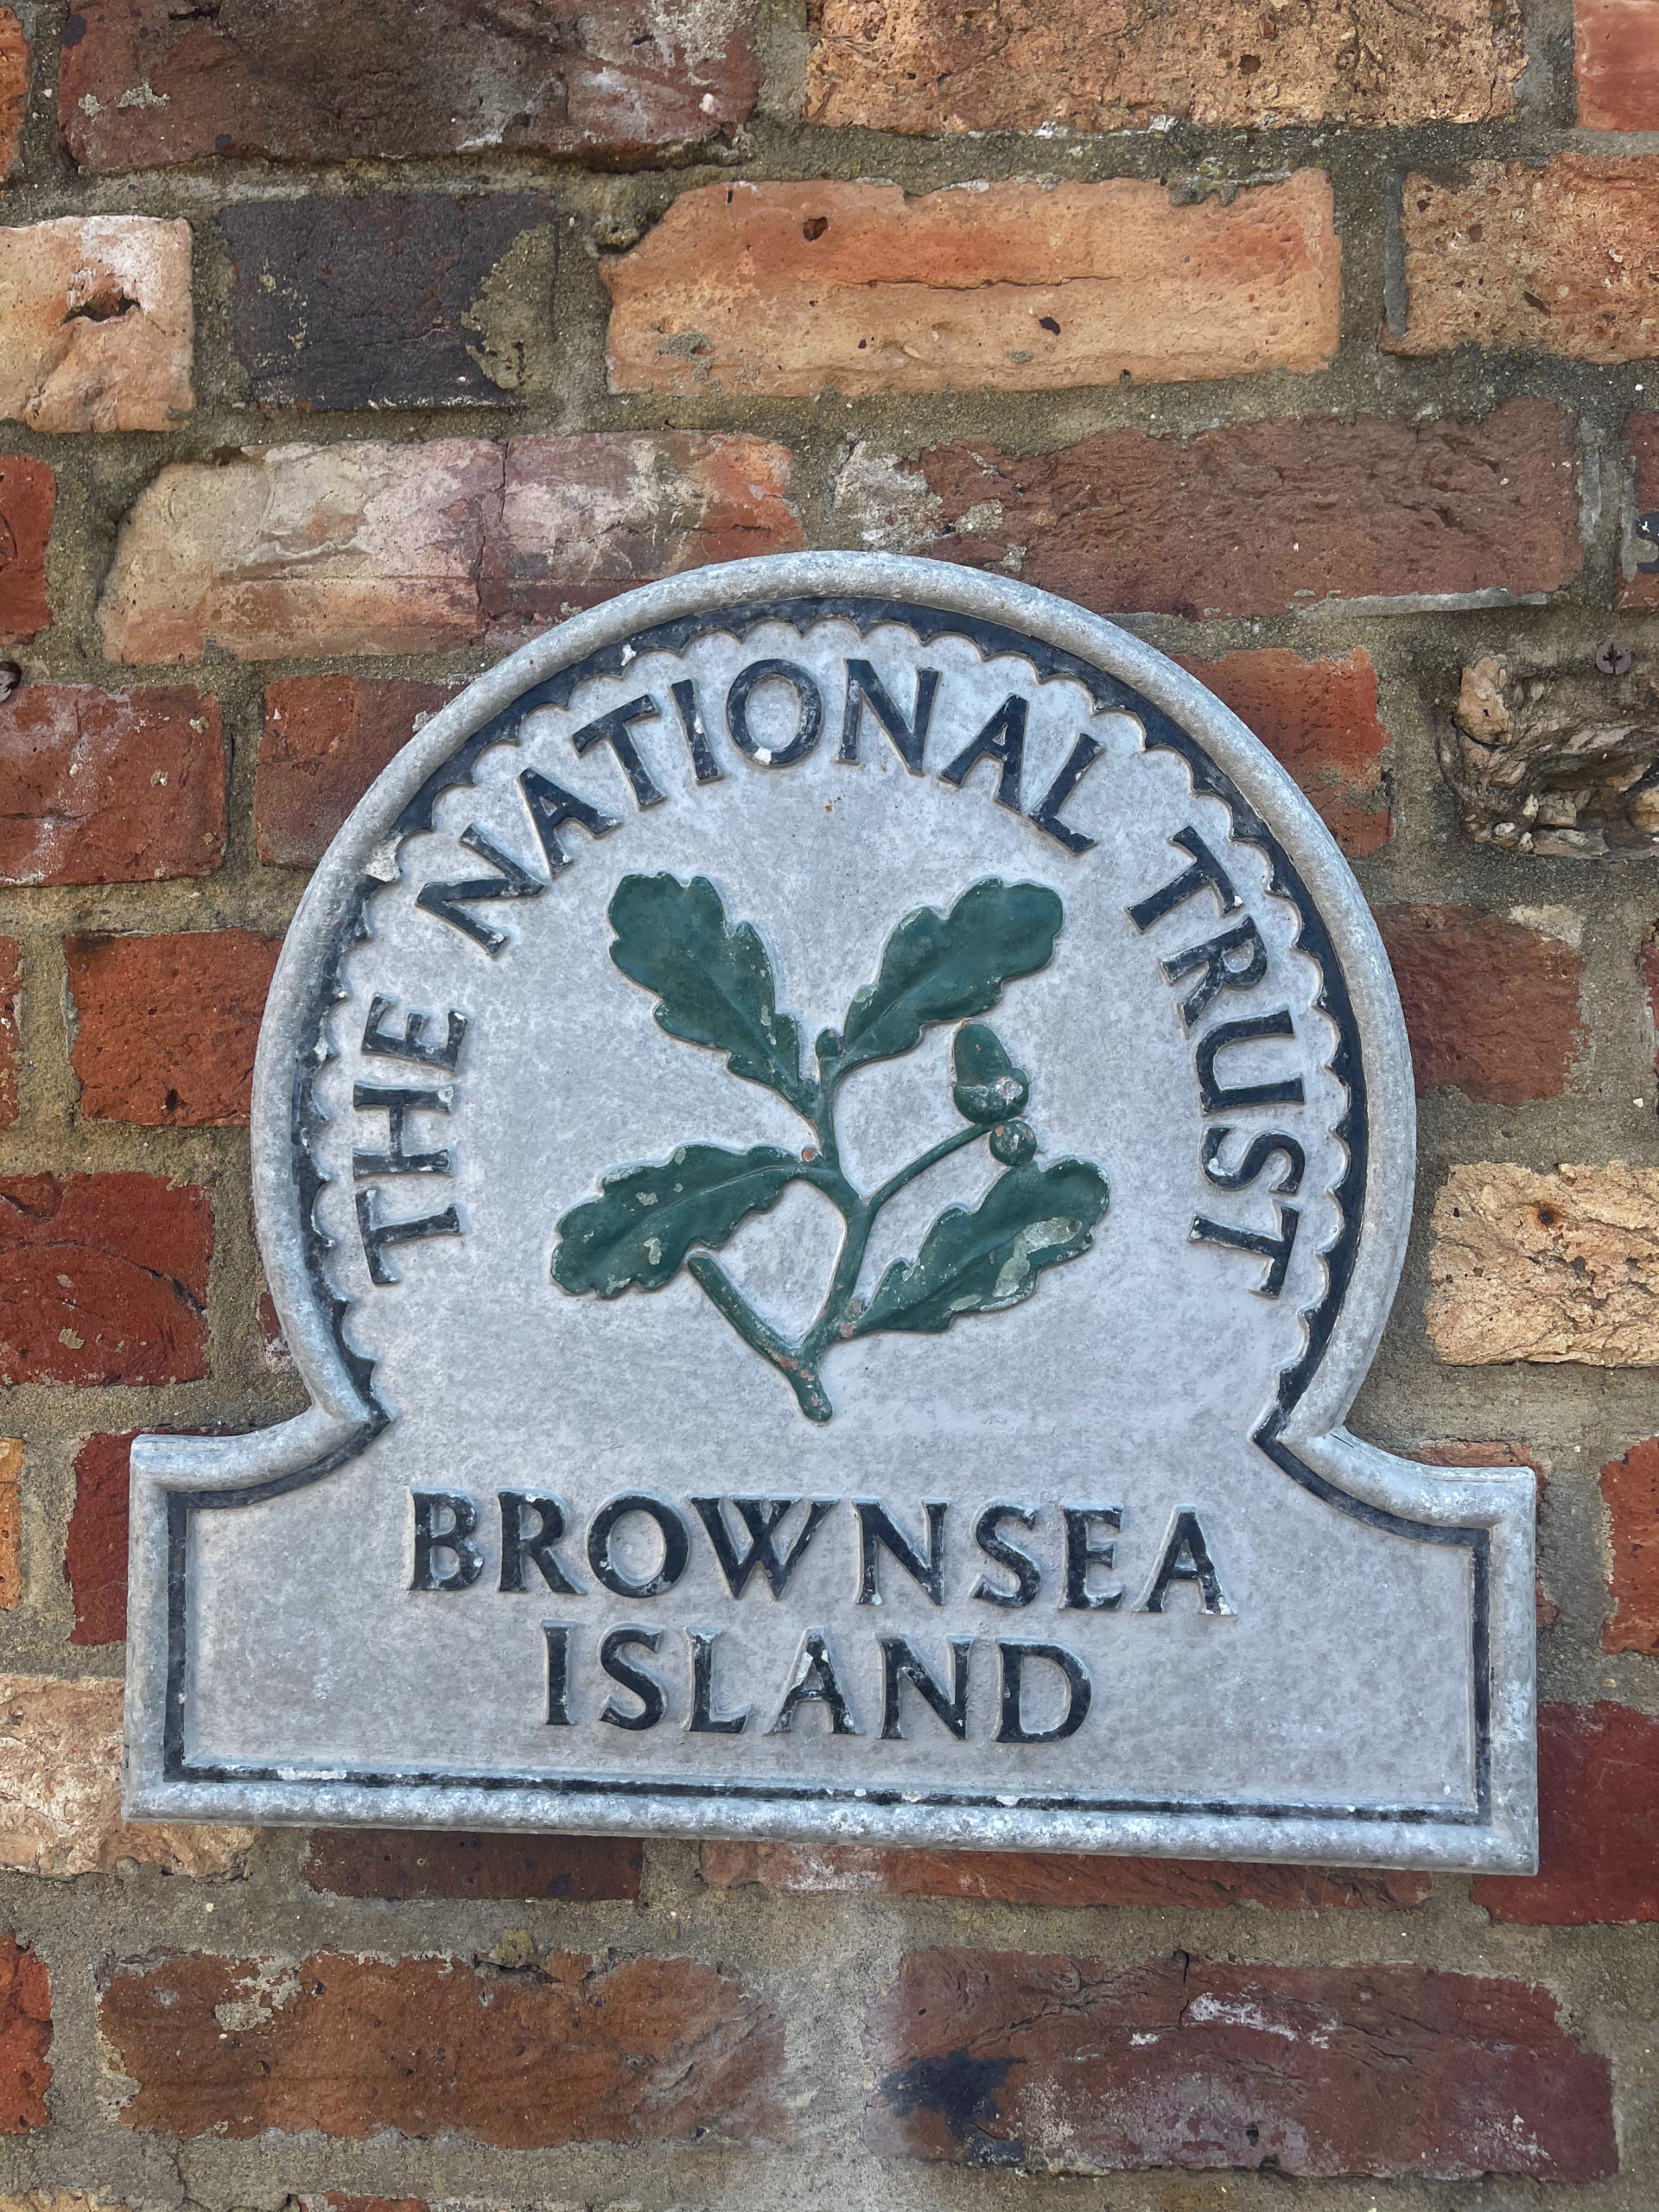 sign that says national trust brownsea island